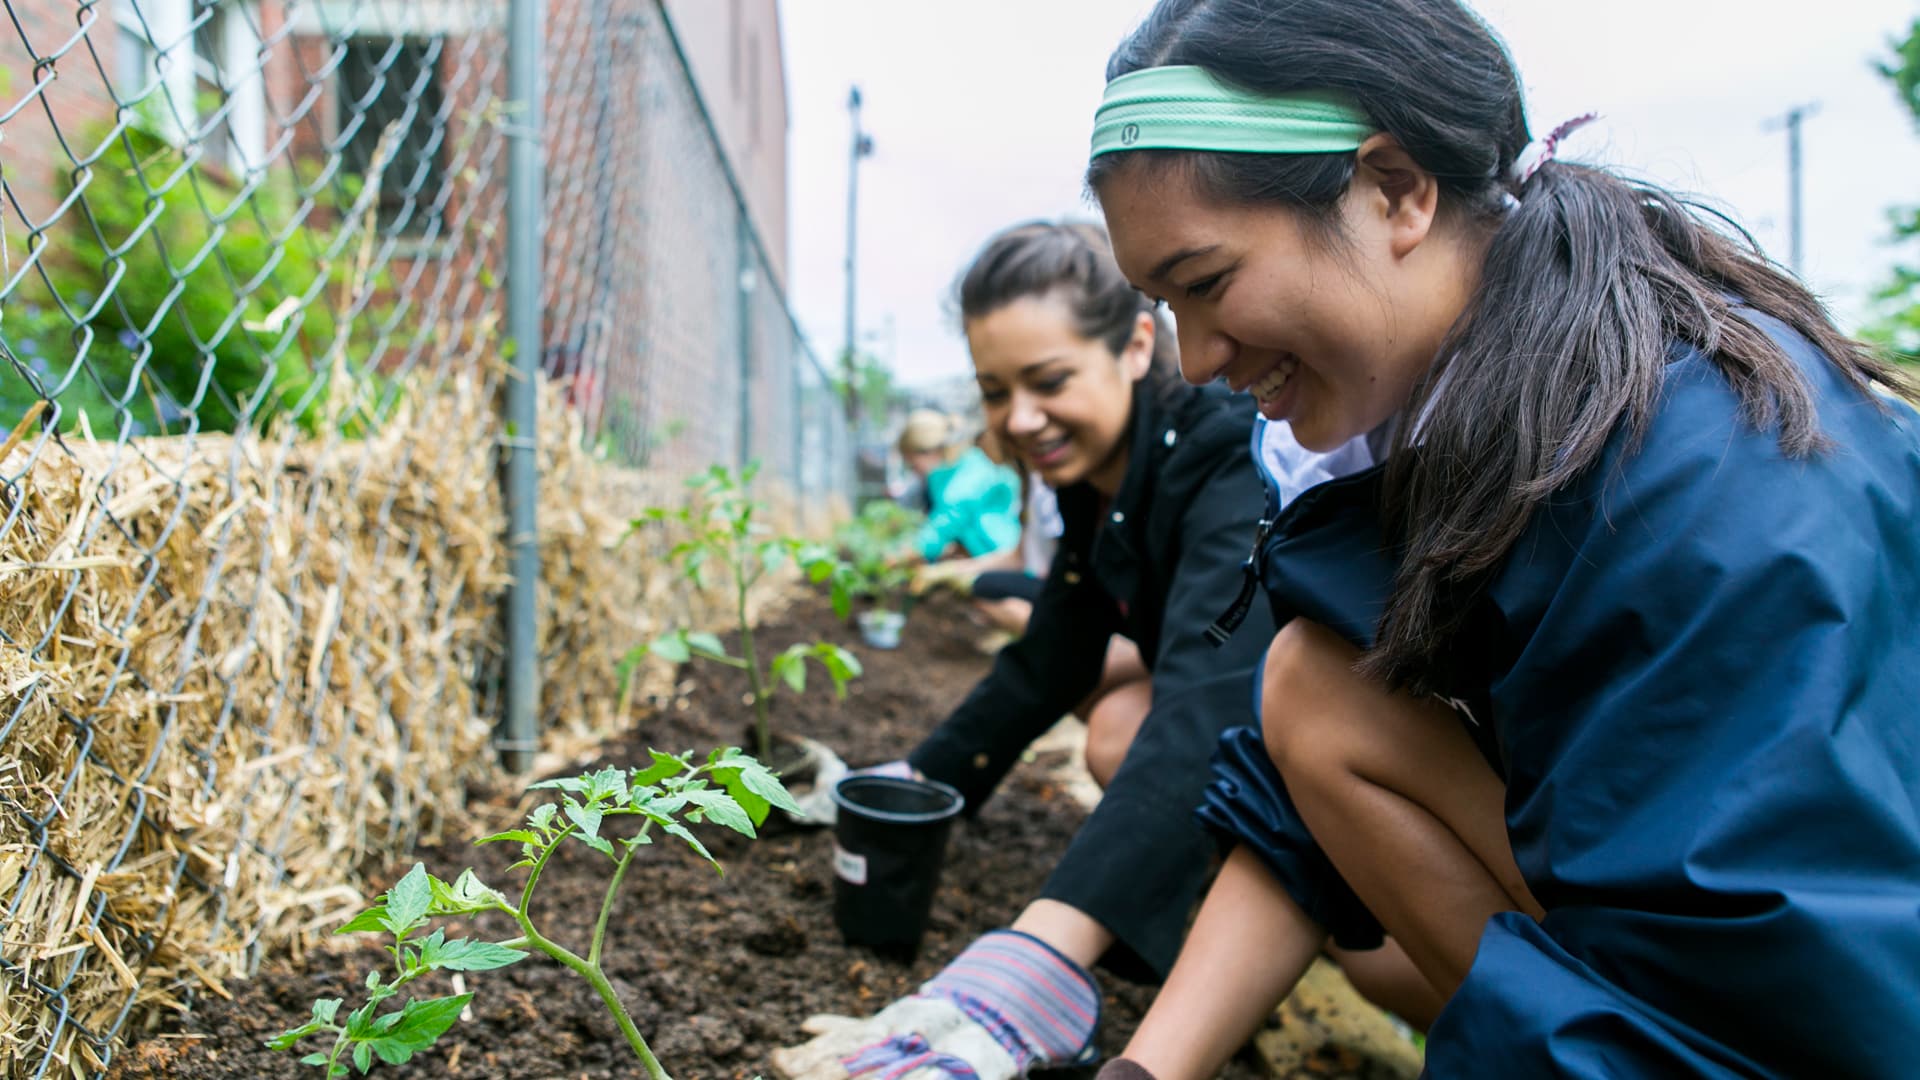 Female Students Planting Tomatoes